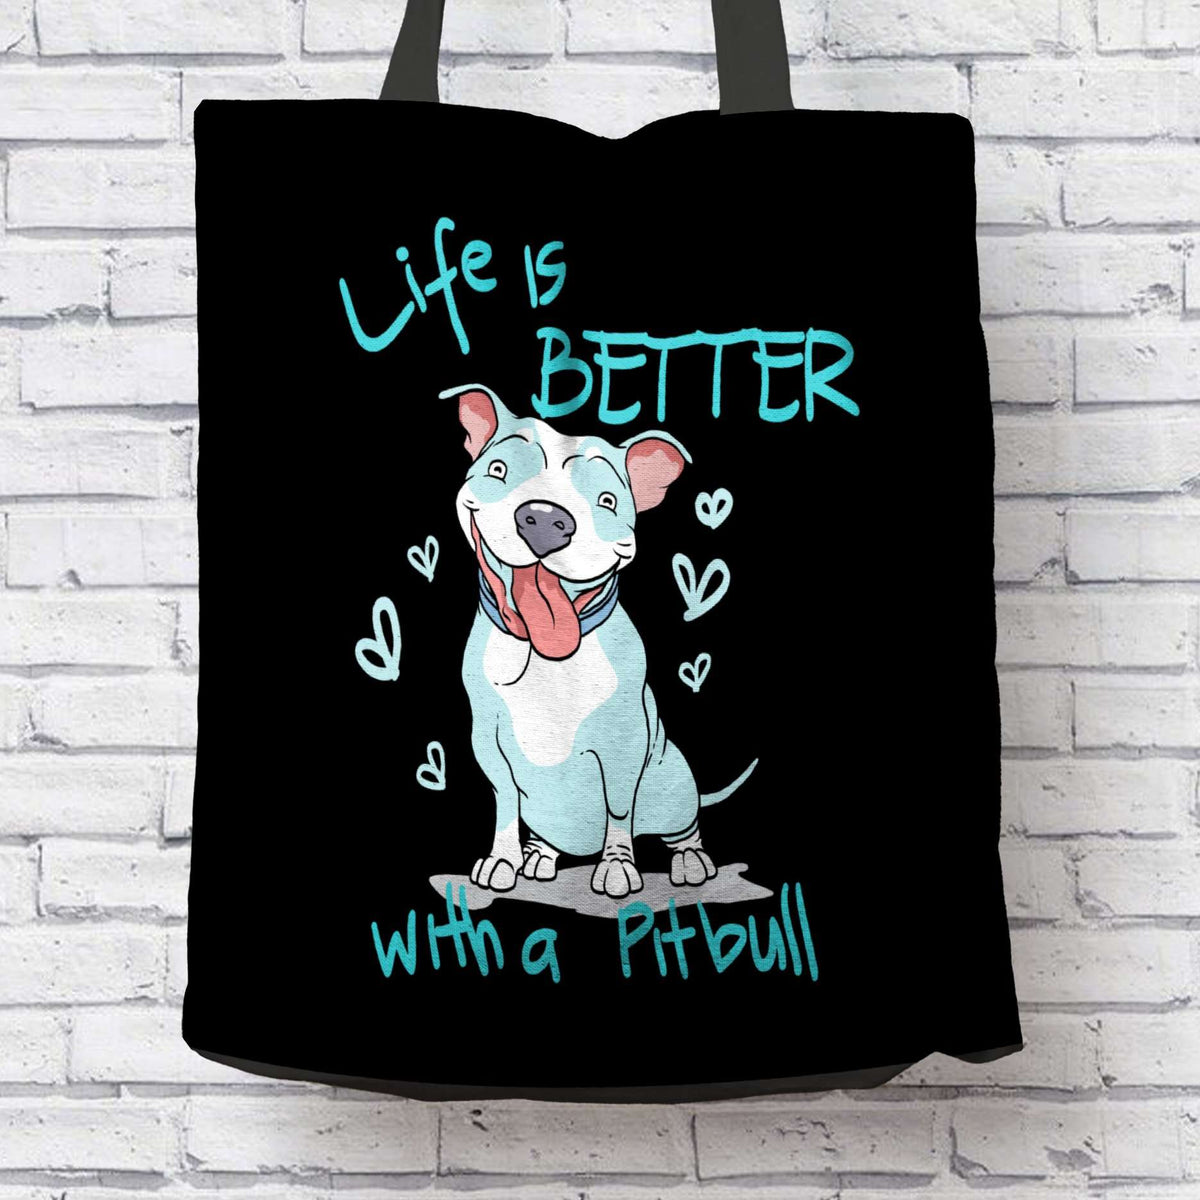 Designs by MyUtopia Shout Out:Life is Better with a Pitbull Cotton Fabric Reusable Shopping Totebag Special Offer,Black,Reusable Fabric Shopping Tote Bag